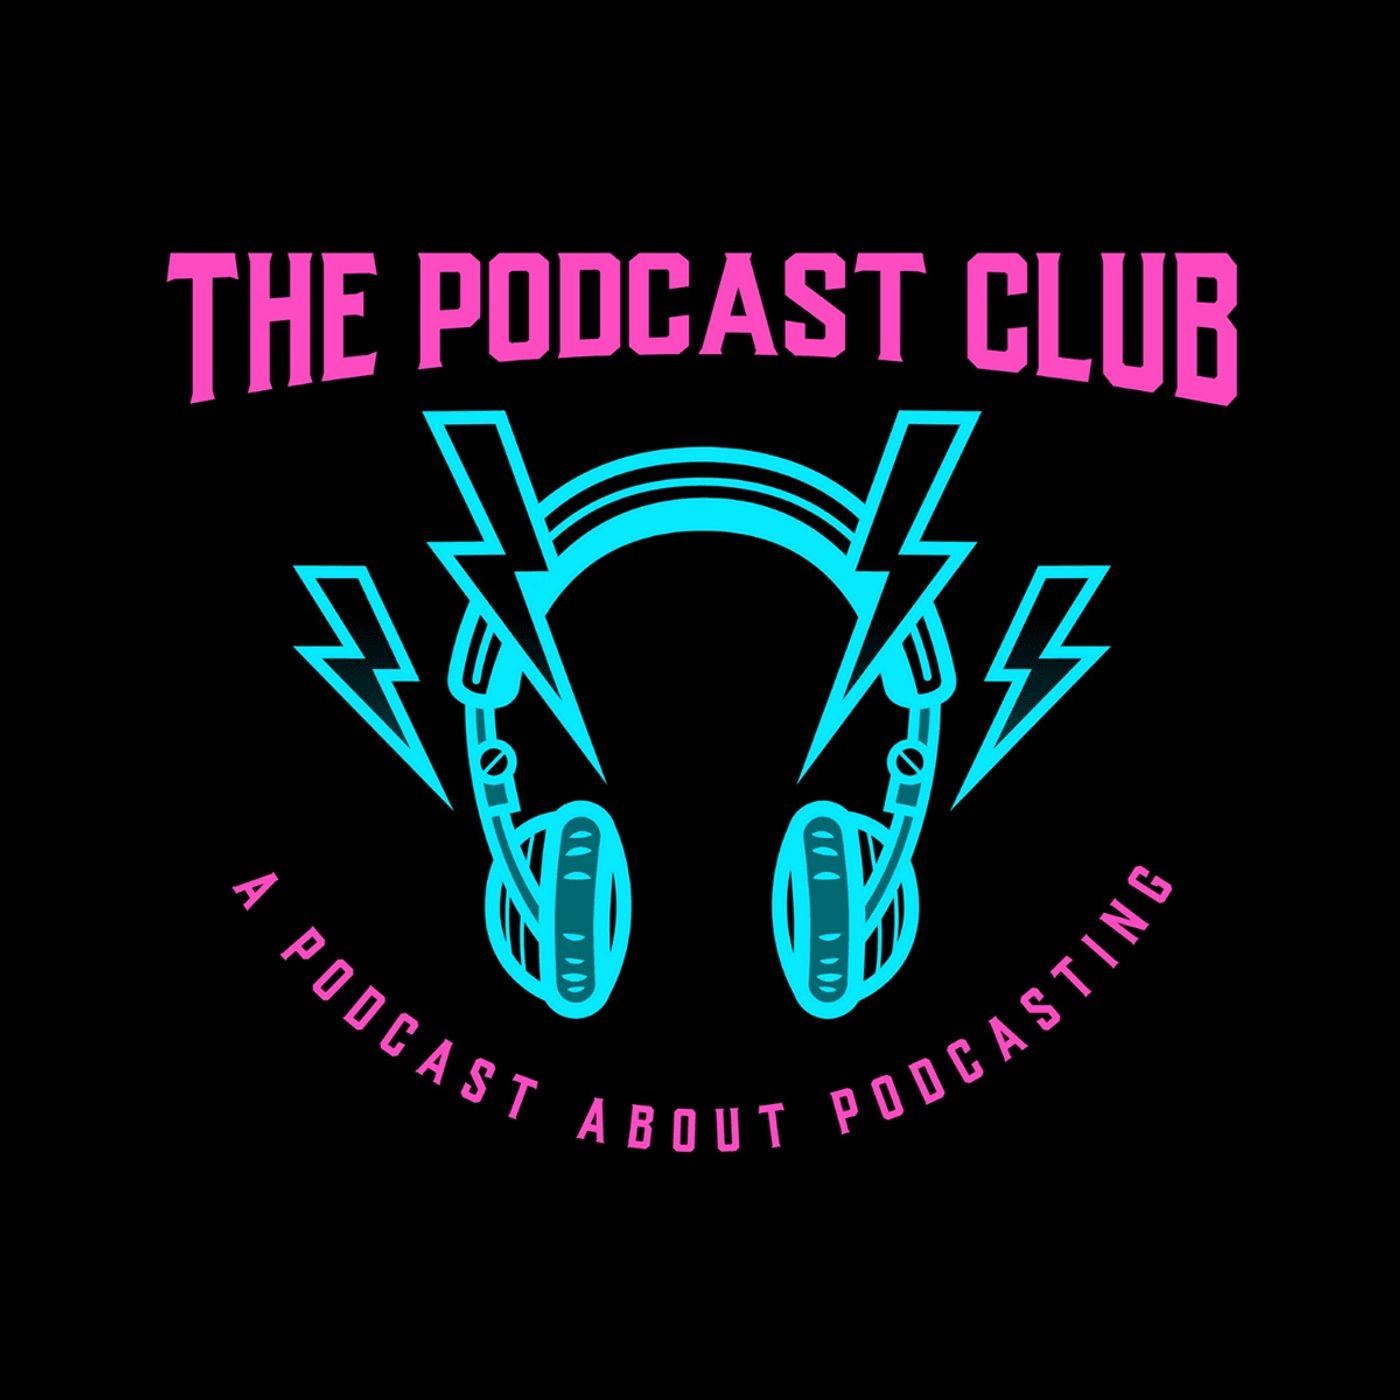 The Podcast Club